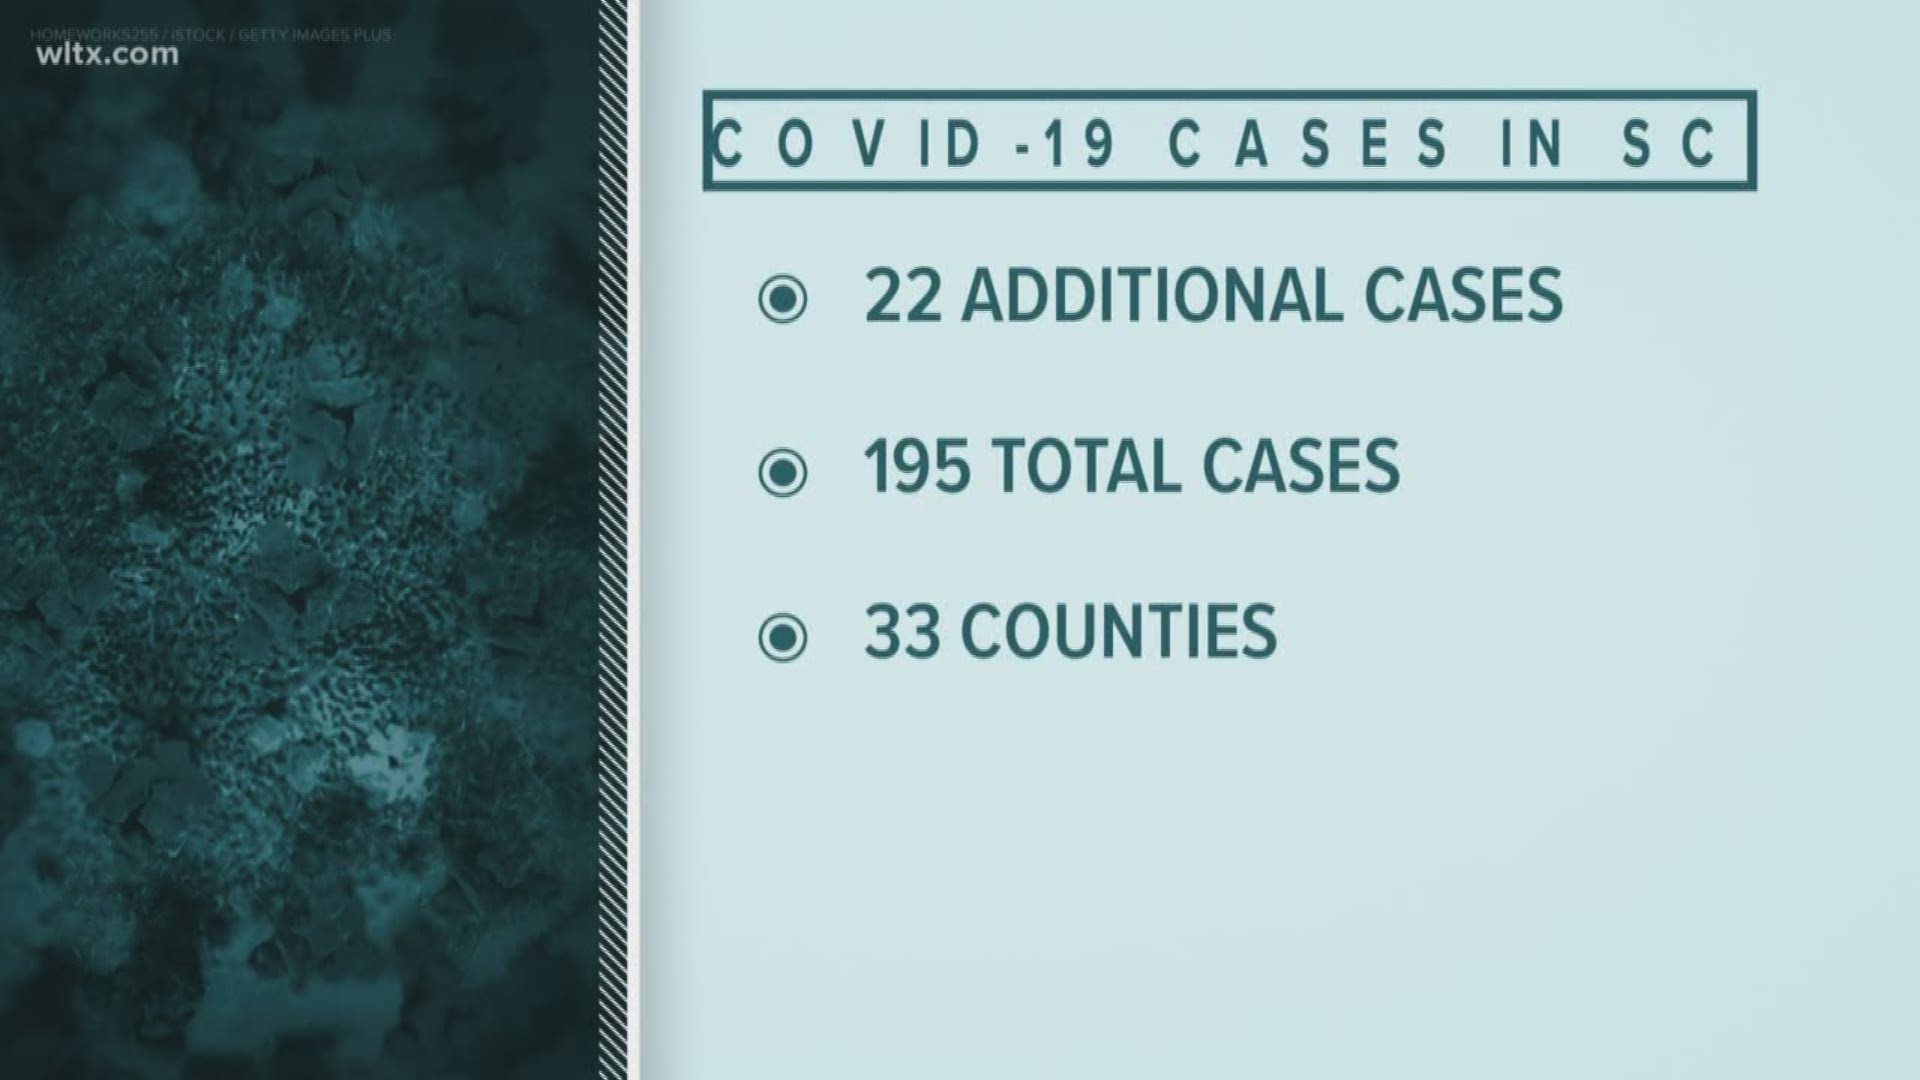 SCDHEC said it is testing 22 more cases of COVID-19